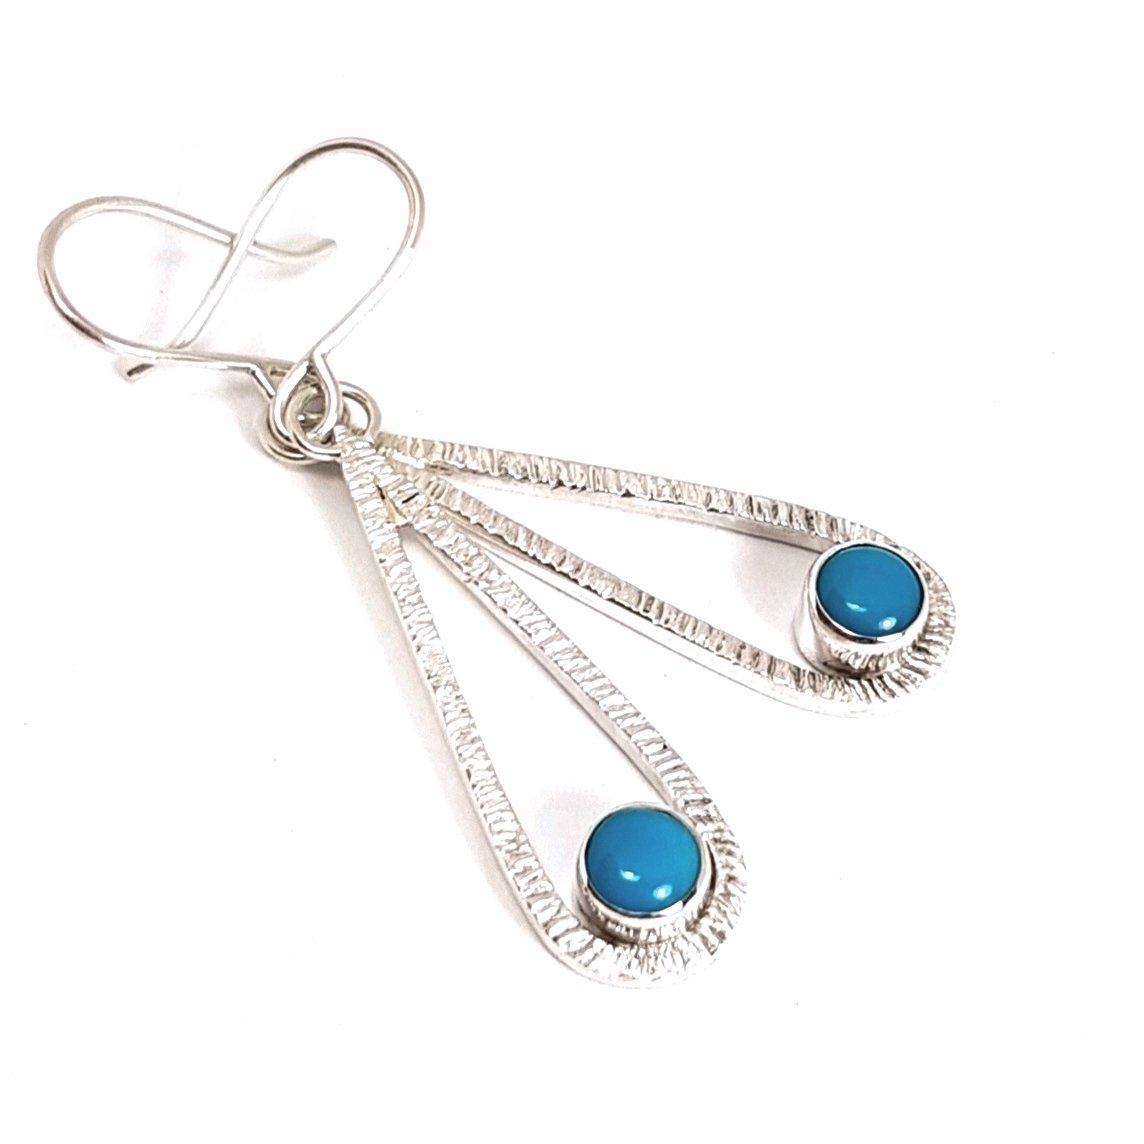 Image of Turquoise Dangle Earrings, Handmade Sterling Silver Earrings with Genuine Turquoise, Recycled Silver